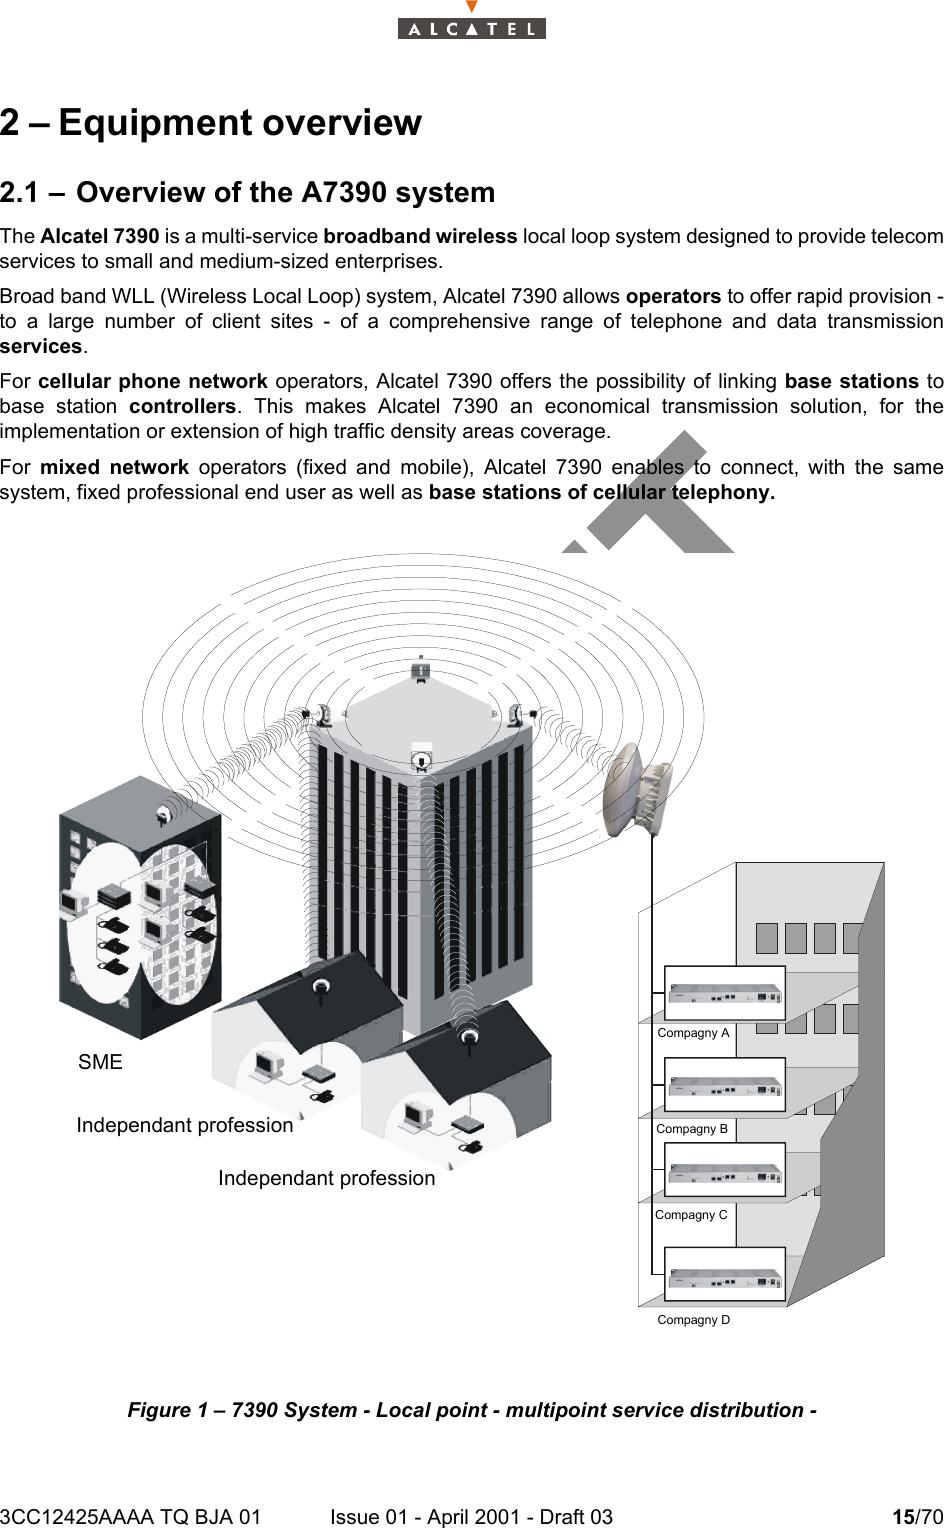 3CC12425AAAA TQ BJA 01 Issue 01 - April 2001 - Draft 03 15/70242 – Equipment overview2.1 – Overview of the A7390 systemThe Alcatel 7390 is a multi-service broadband wireless local loop system designed to provide telecomservices to small and medium-sized enterprises.Broad band WLL (Wireless Local Loop) system, Alcatel 7390 allows operators to offer rapid provision -to a large number of client sites - of a comprehensive range of telephone and data transmissionservices.For cellular phone network operators, Alcatel 7390 offers the possibility of linking base stations tobase station controllers. This makes Alcatel 7390 an economical transmission solution, for theimplementation or extension of high traffic density areas coverage.For  mixed network operators (fixed and mobile), Alcatel 7390 enables to connect, with the samesystem, fixed professional end user as well as base stations of cellular telephony.Figure 1 – 7390 System - Local point - multipoint service distribution -SMEIndependant professionIndependant professionCompagny DCompagny ACompagny BCompagny C